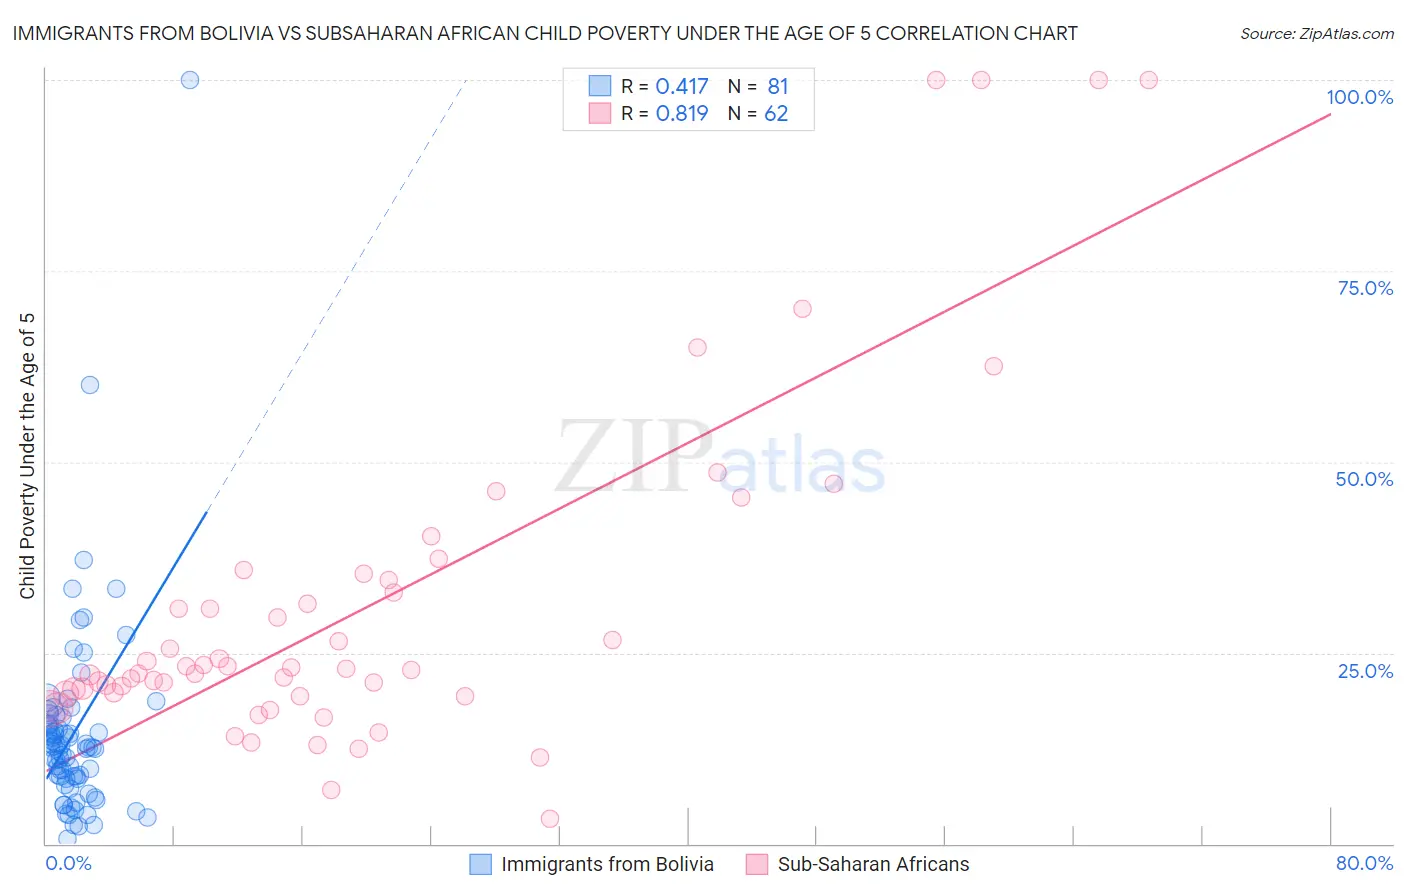 Immigrants from Bolivia vs Subsaharan African Child Poverty Under the Age of 5